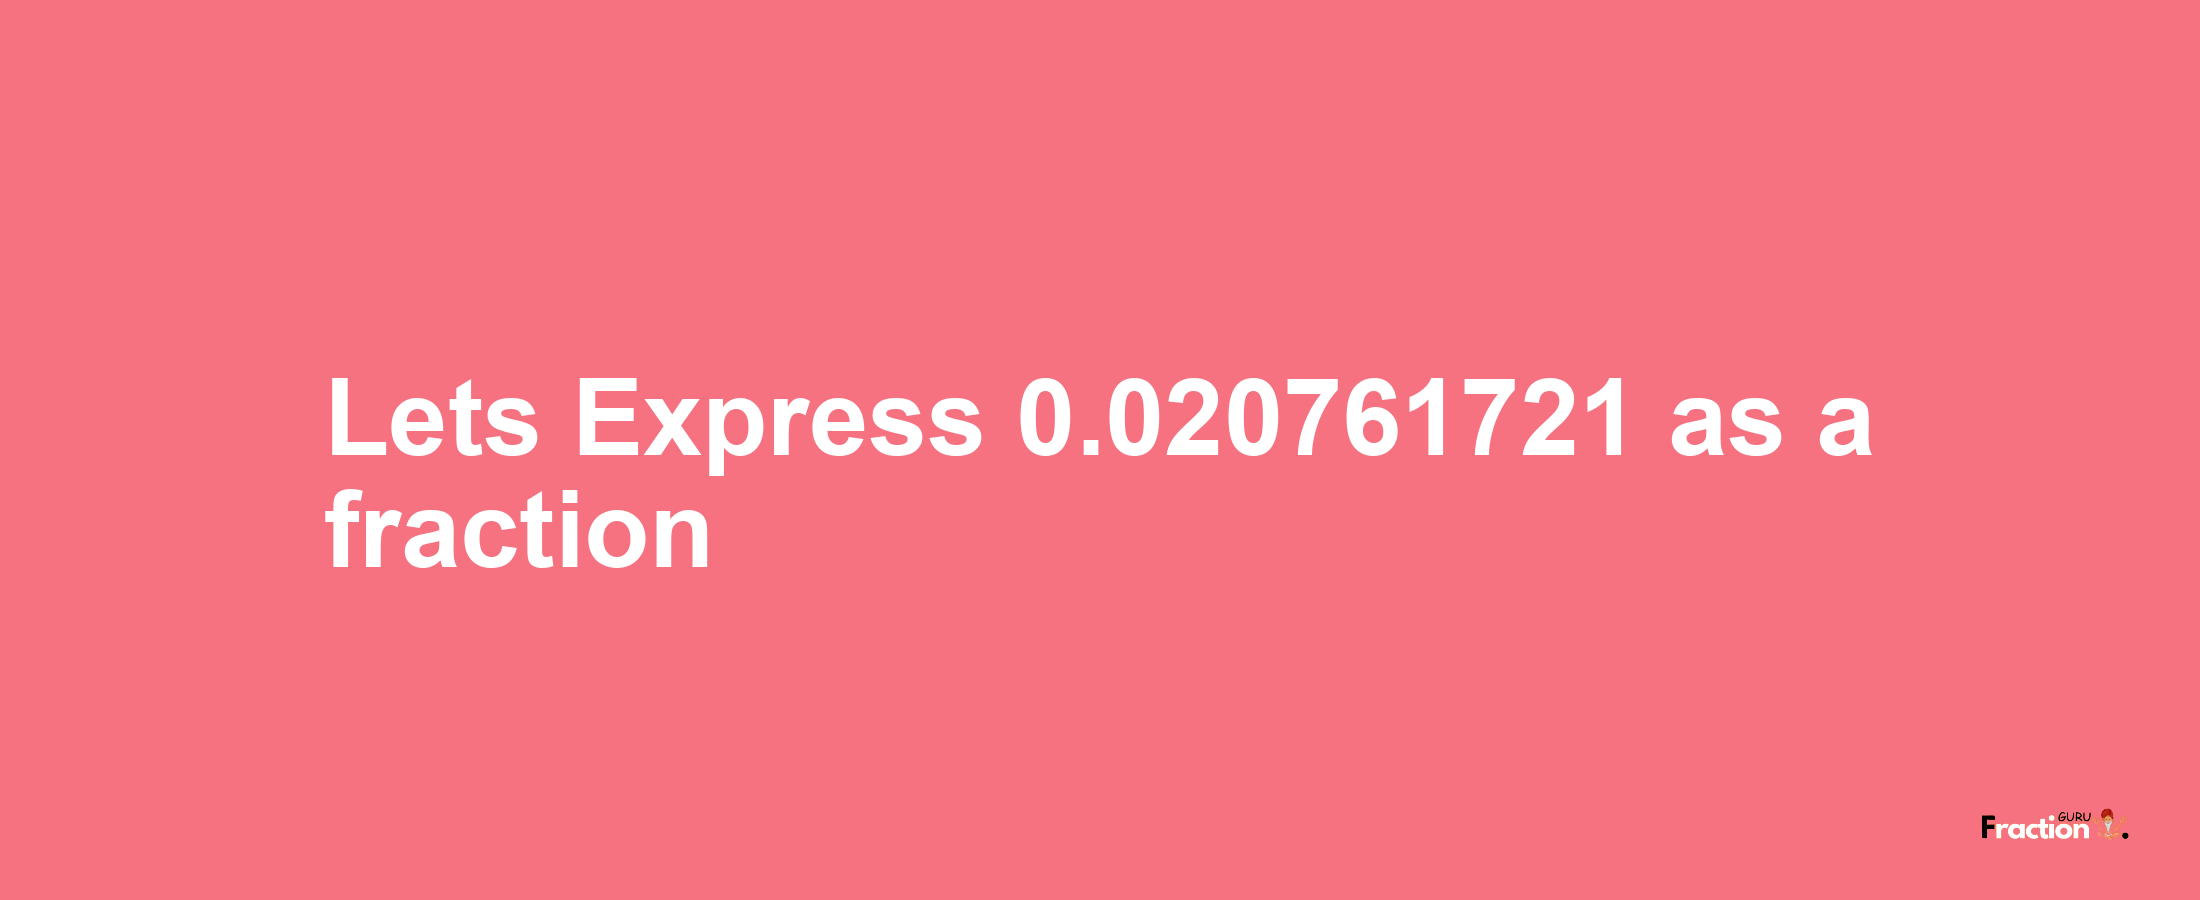 Lets Express 0.020761721 as afraction